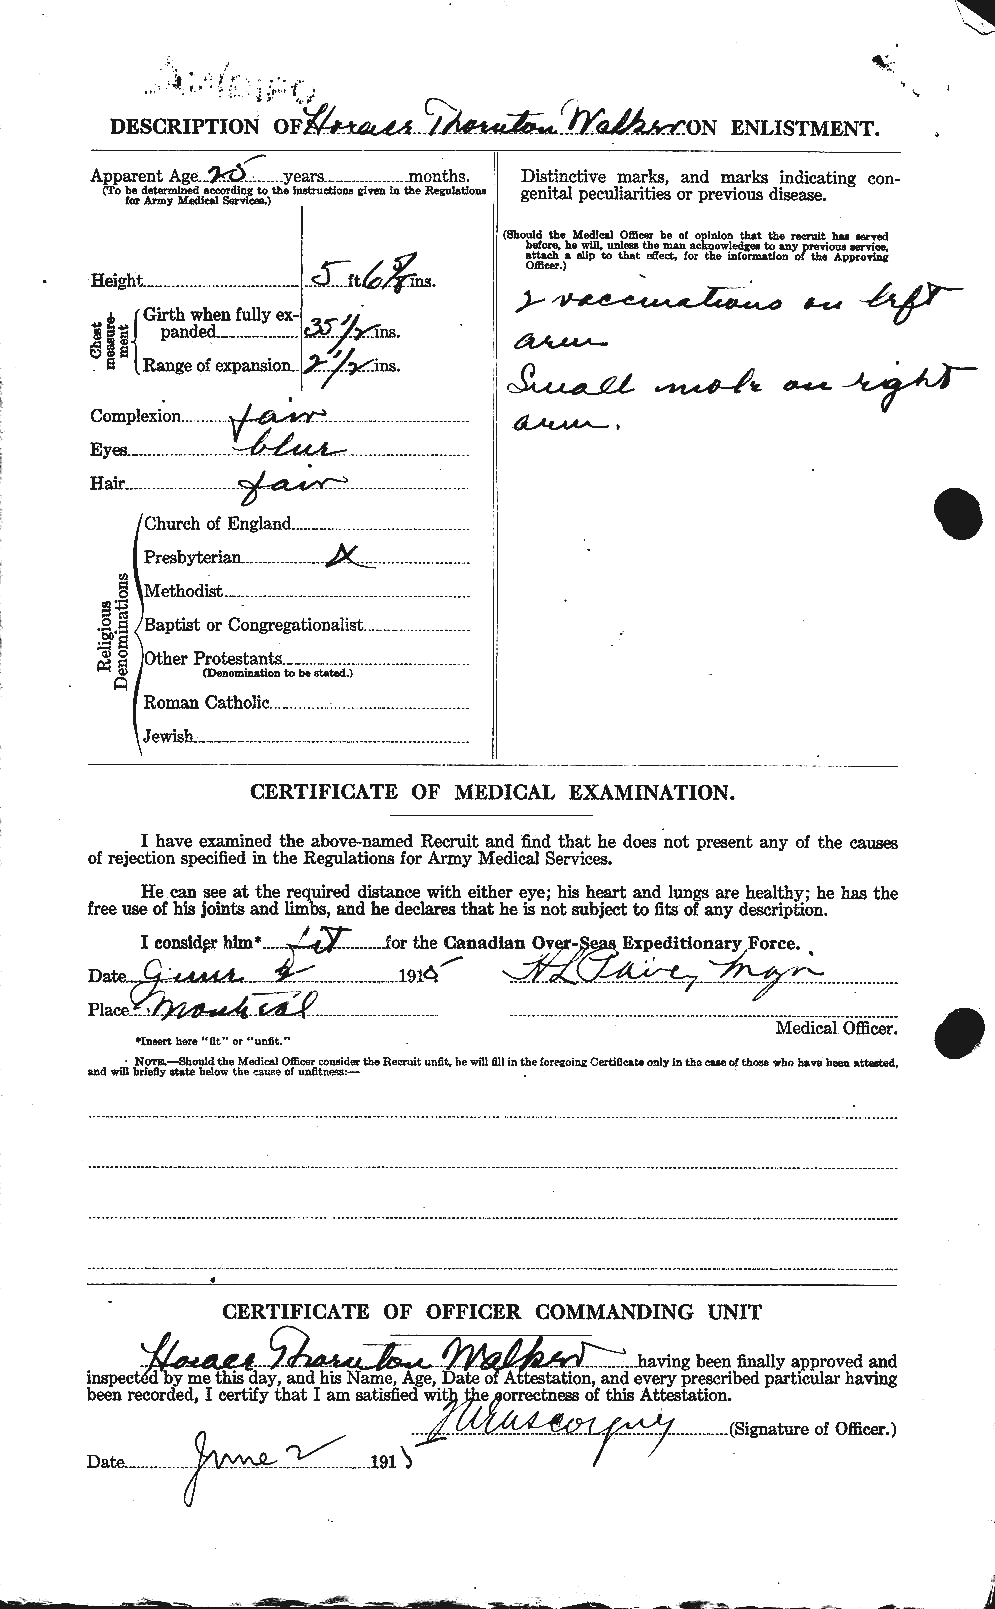 Personnel Records of the First World War - CEF 692085b